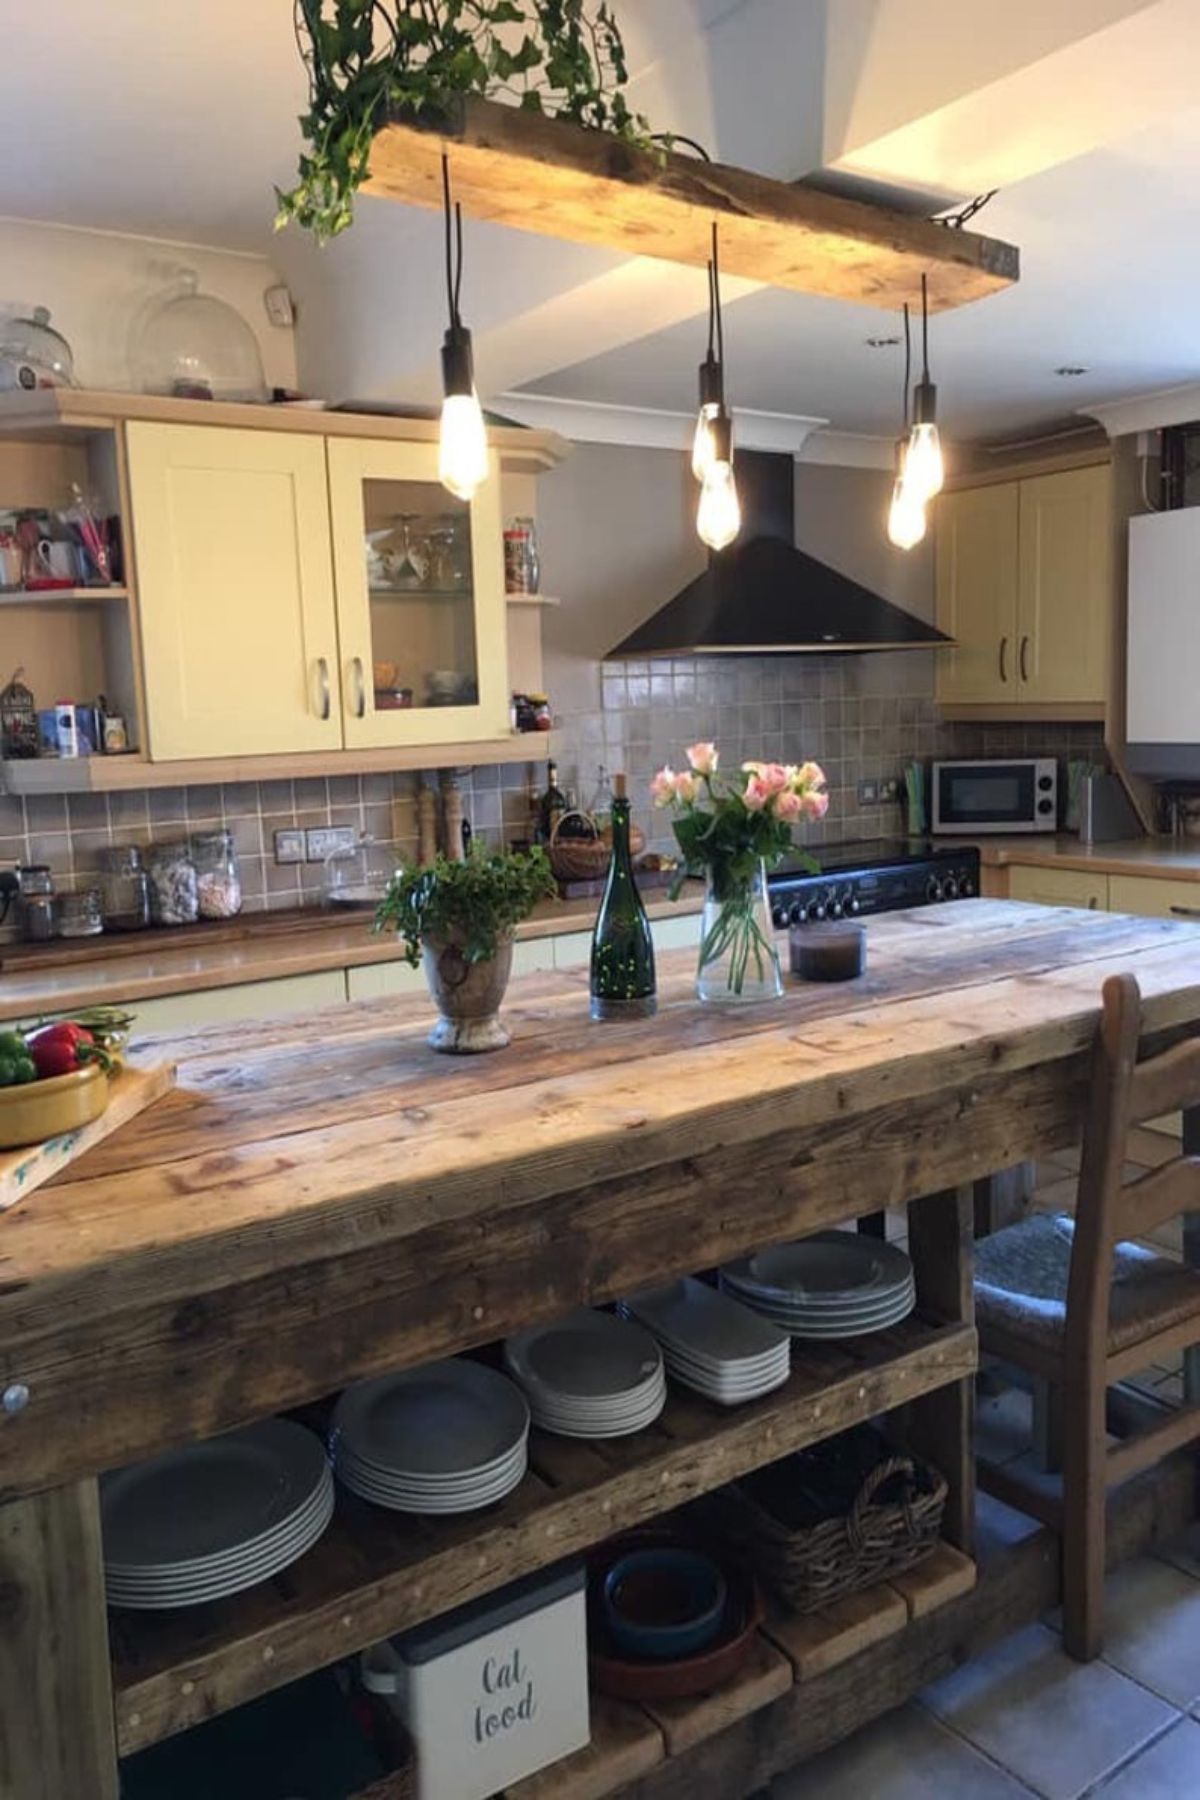 Rustic Kitchen Ideas – Crafting a Space of Your Own